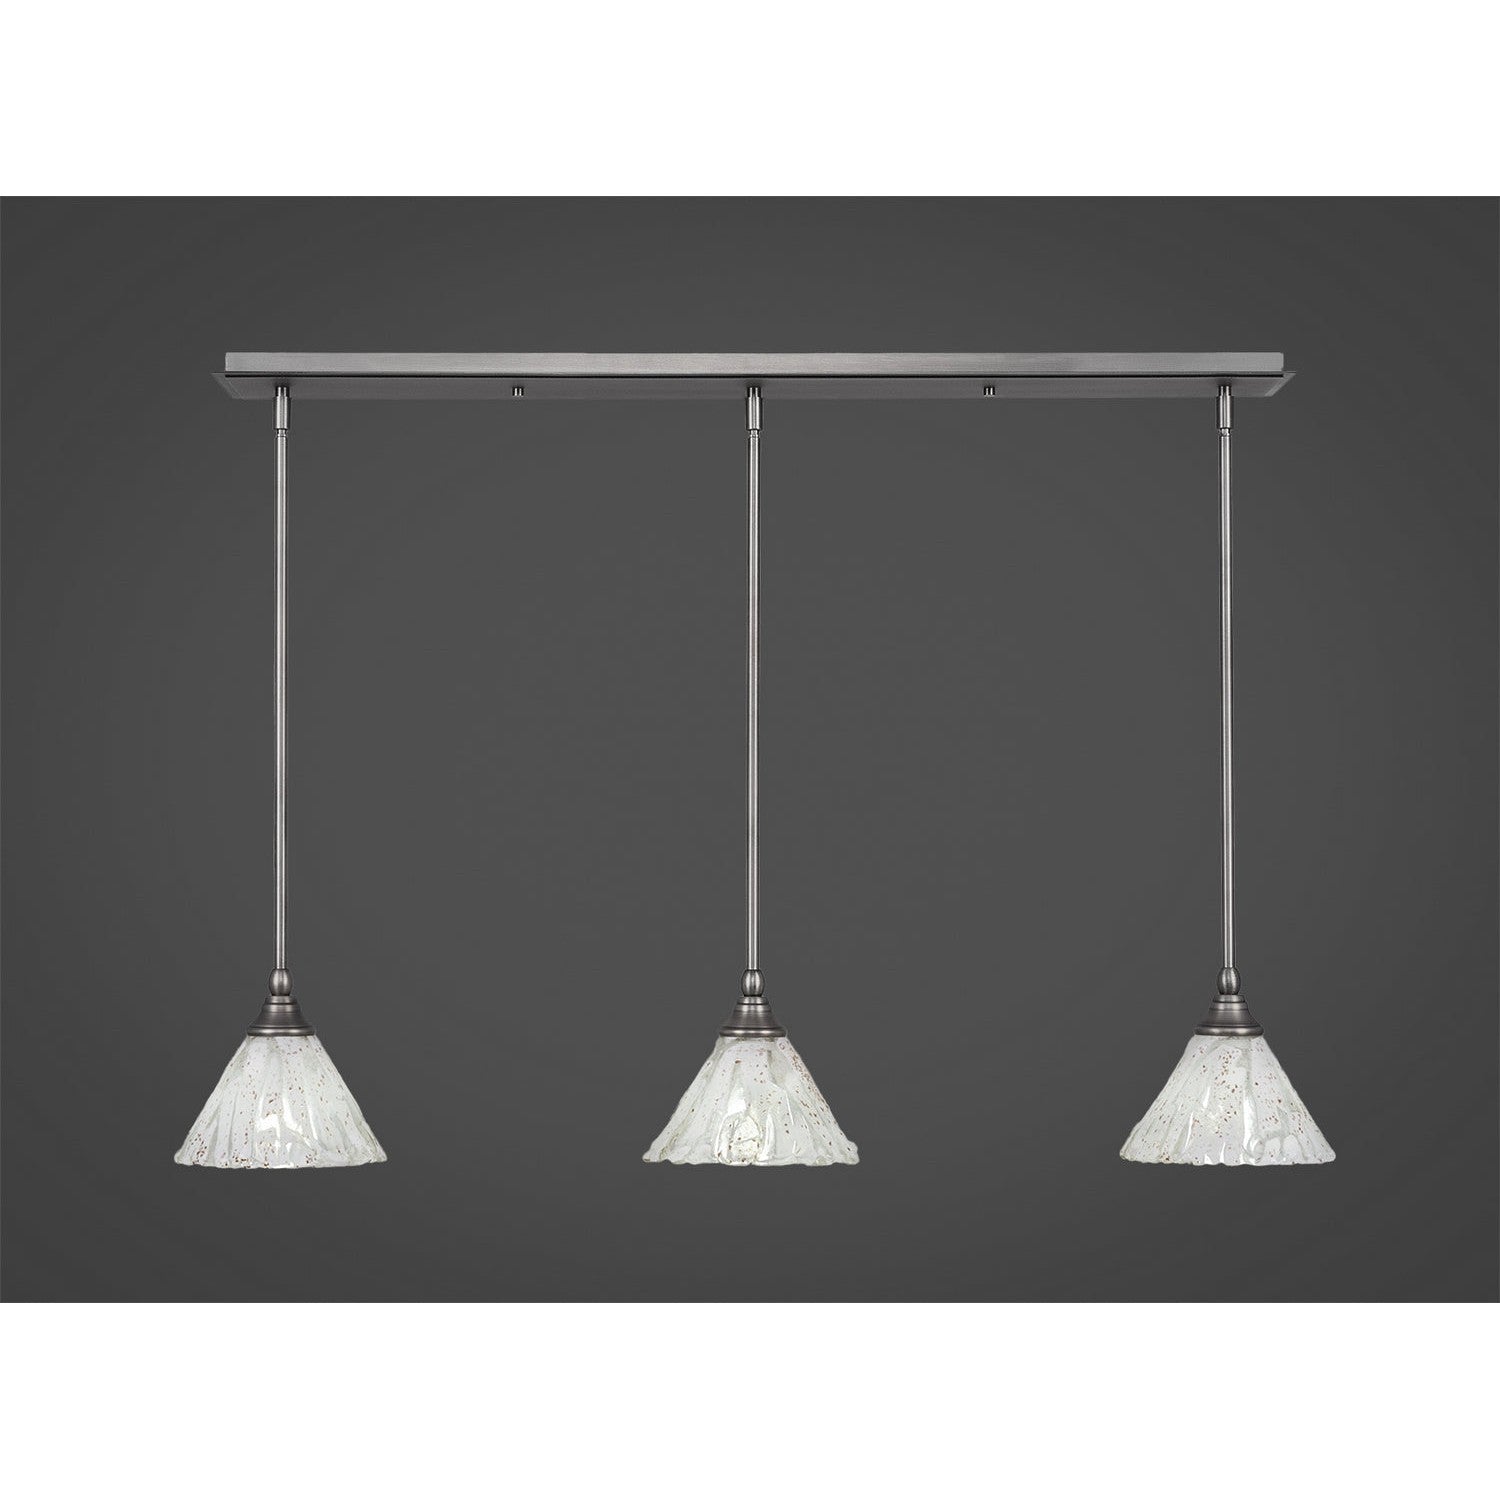 Toltec Any 36-bn-7195 Pendant Light - Brushed Nickel